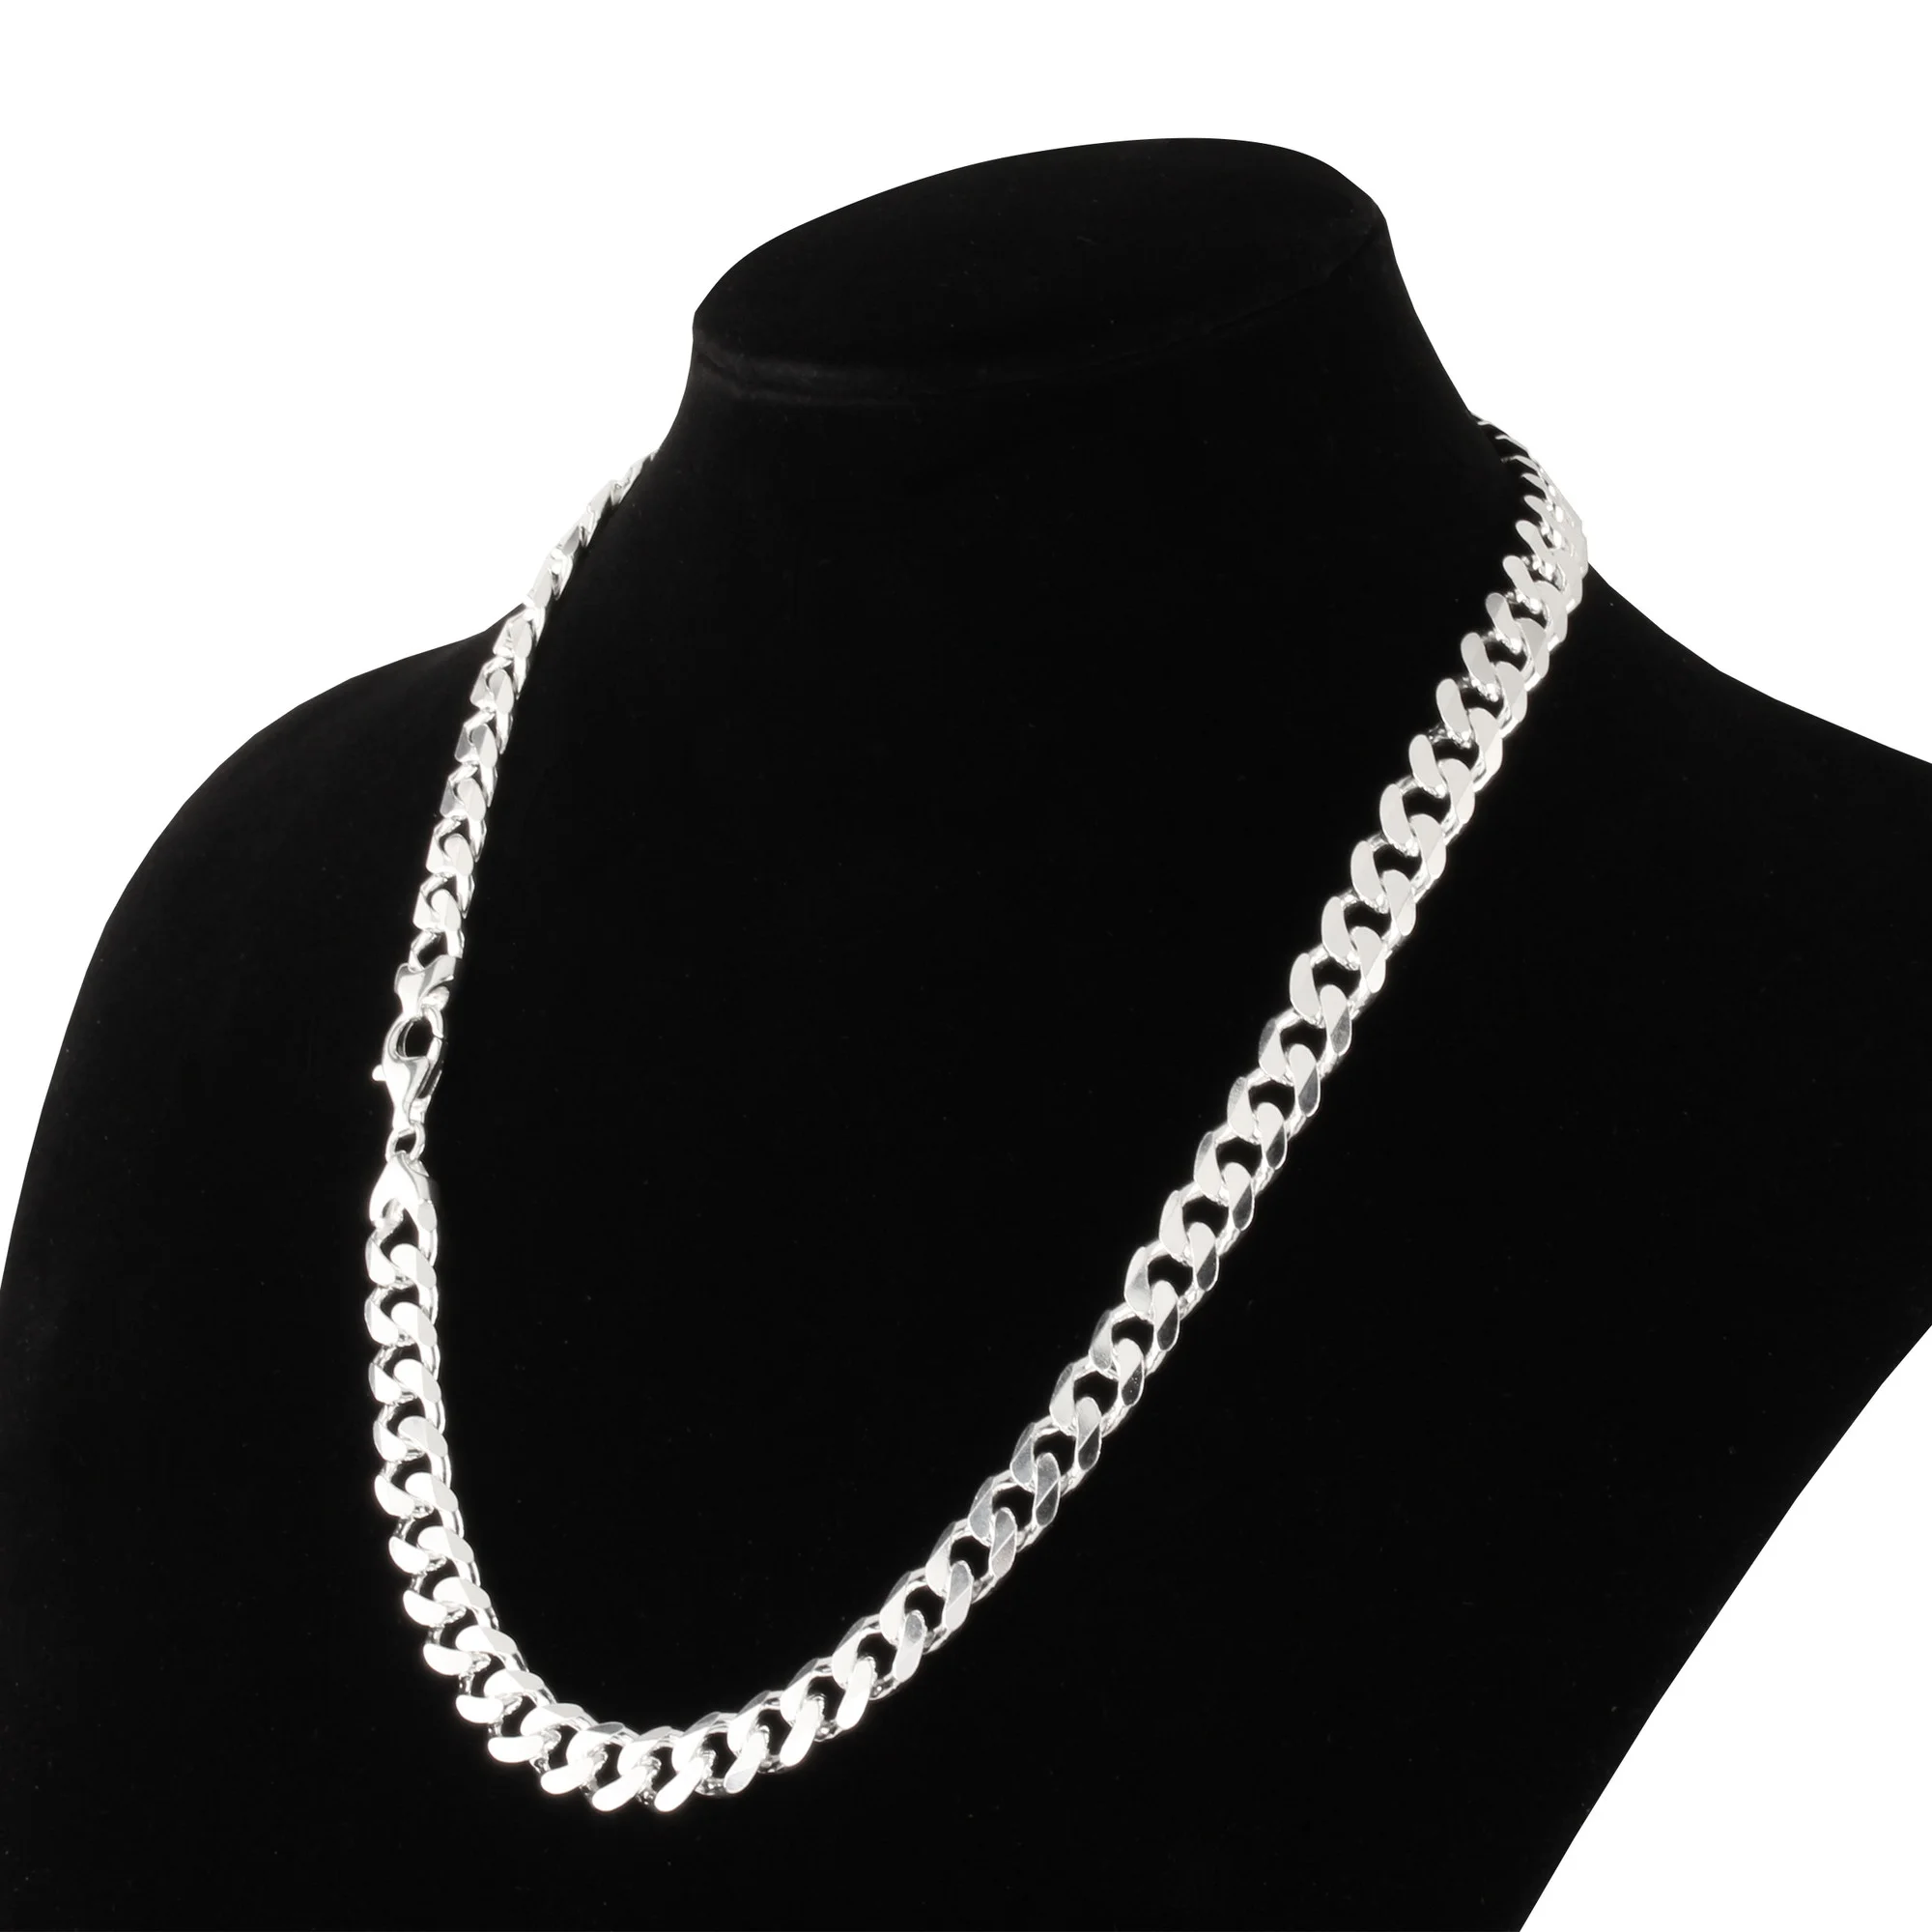 Men's Solid Silver Curb Chain, 9.2mm Wide, Highly Polished Mirror Finish